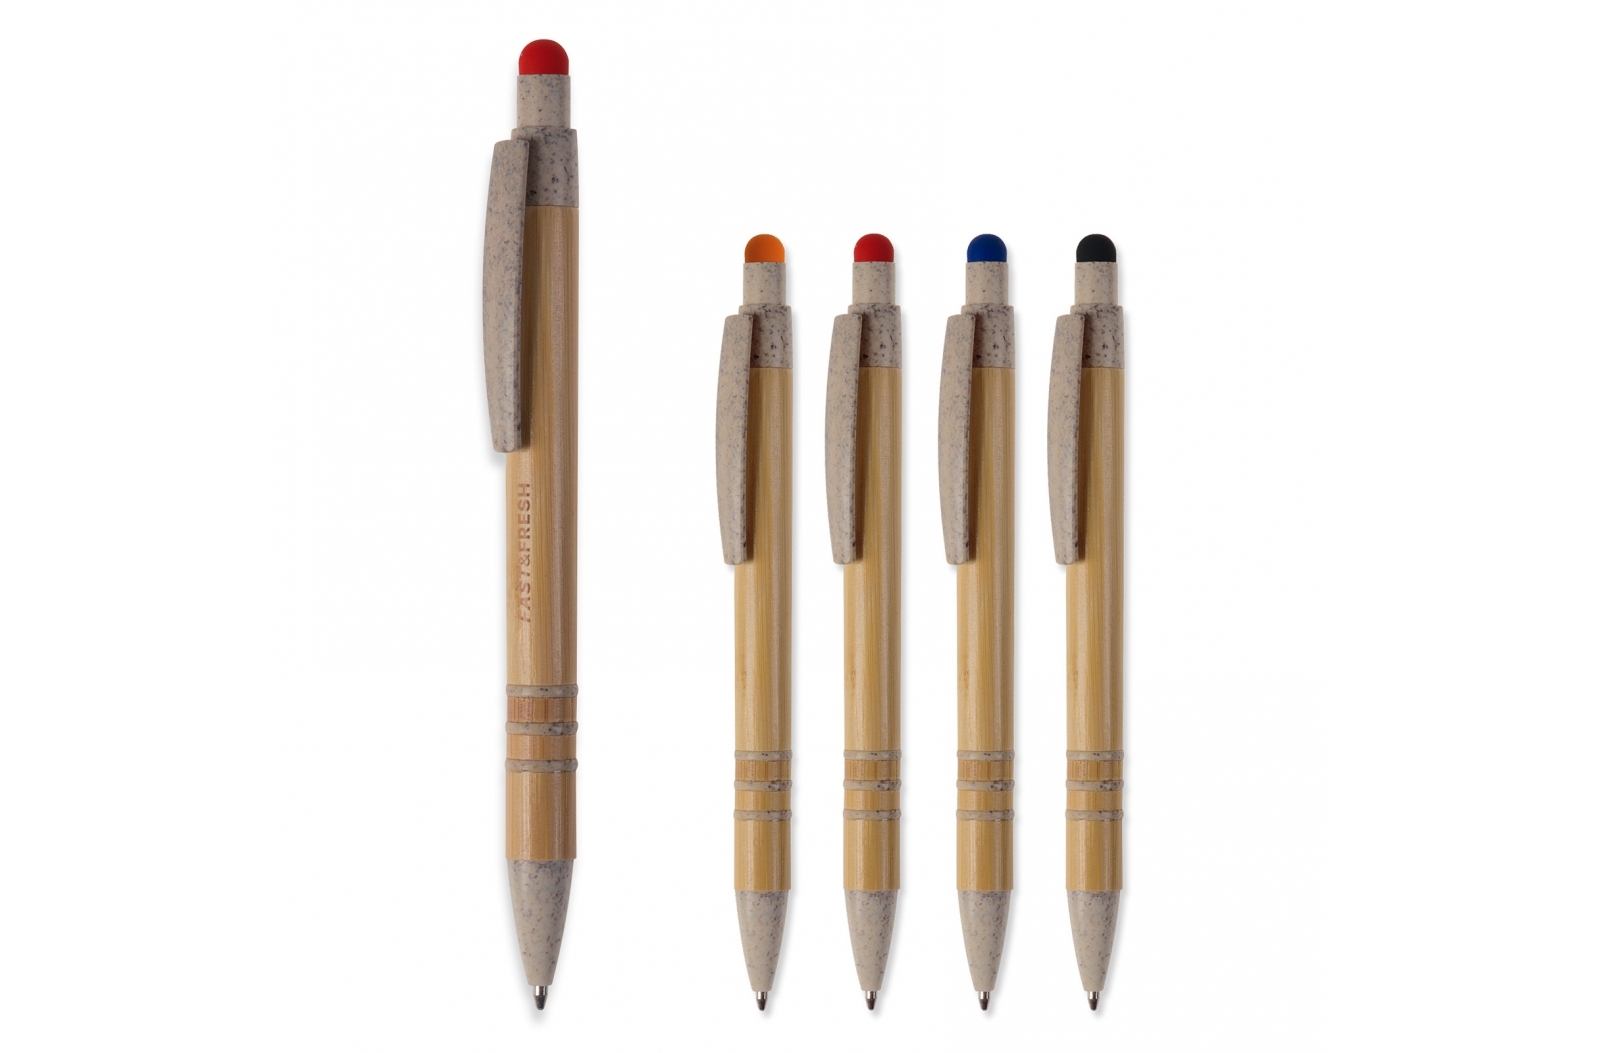 This is a ballpoint pen made from bamboo and wheat straw, which also features a stylus. - Farthingloe